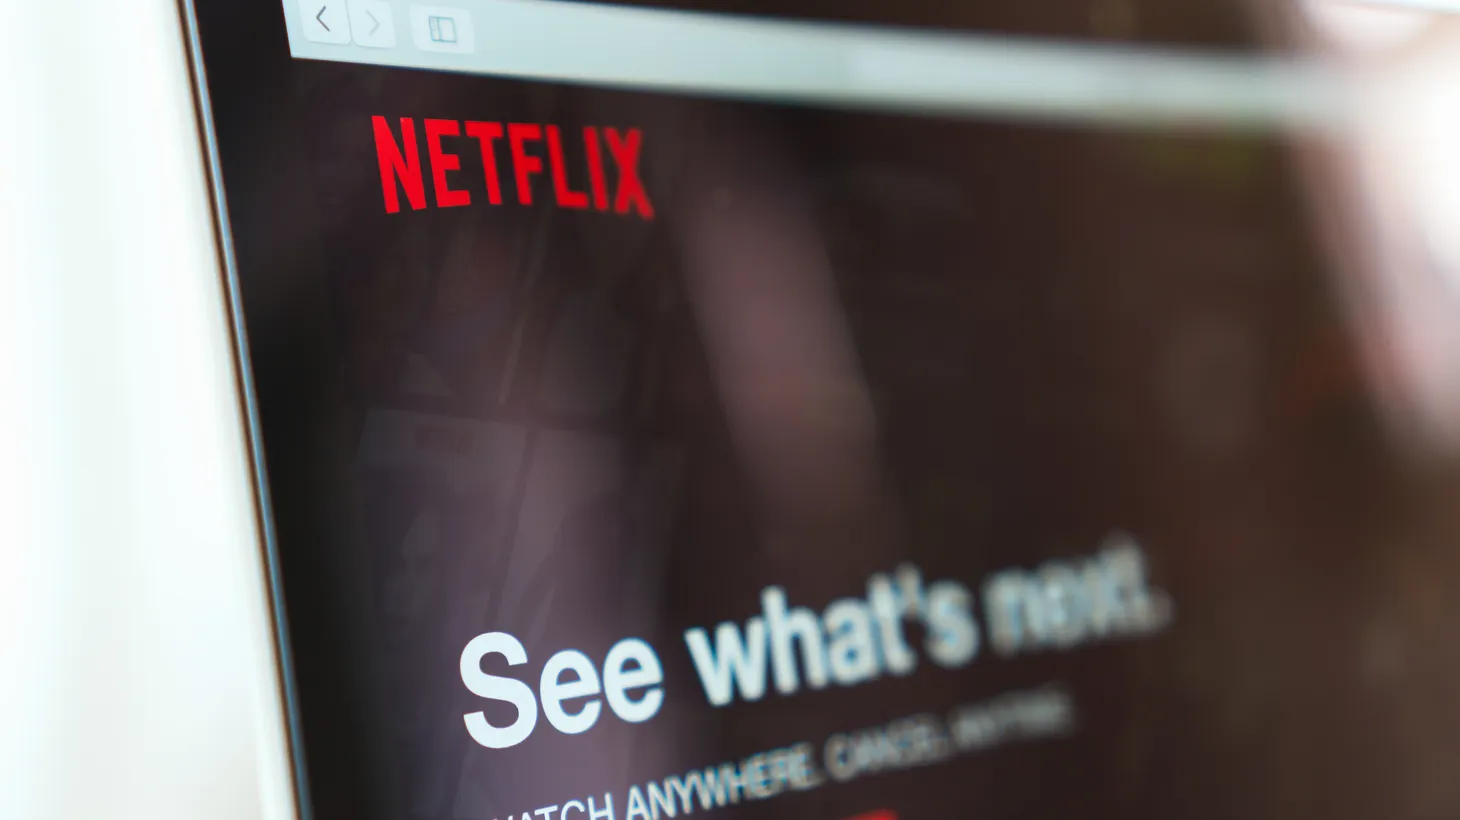 “[Netflix] is a company that for the past 10 years has dined out every quarter on their subscriber growth, regardless of how much money they were losing to get to that. And now, when they've gotten there, they are trying to switch the narrative,” says Matt Belloni.